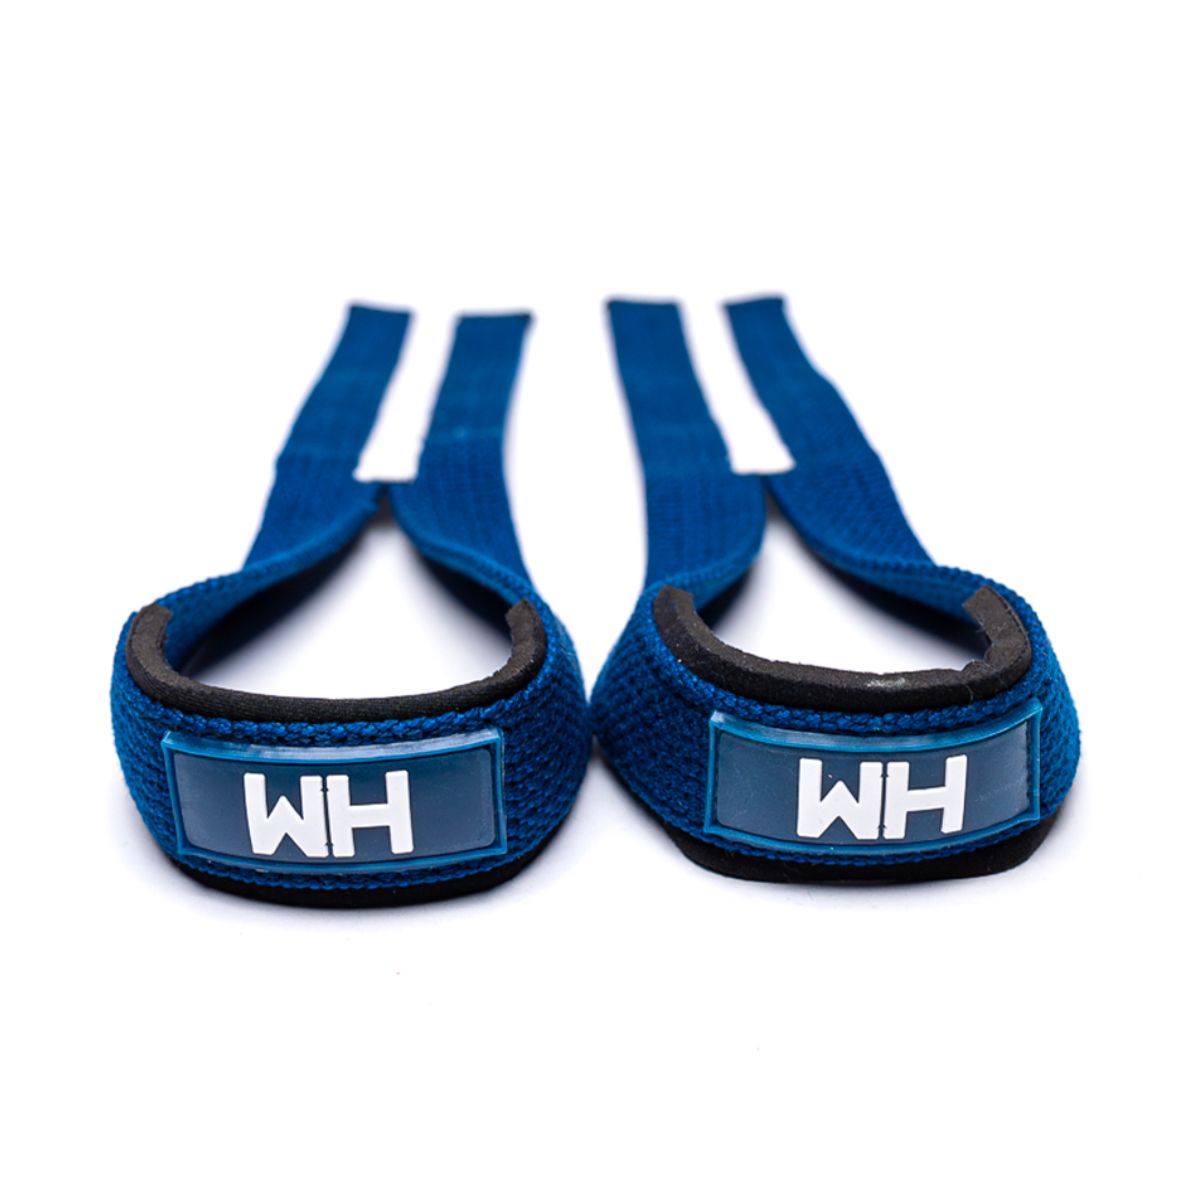 STASH Weightlifting  The Best Weightlifting Straps